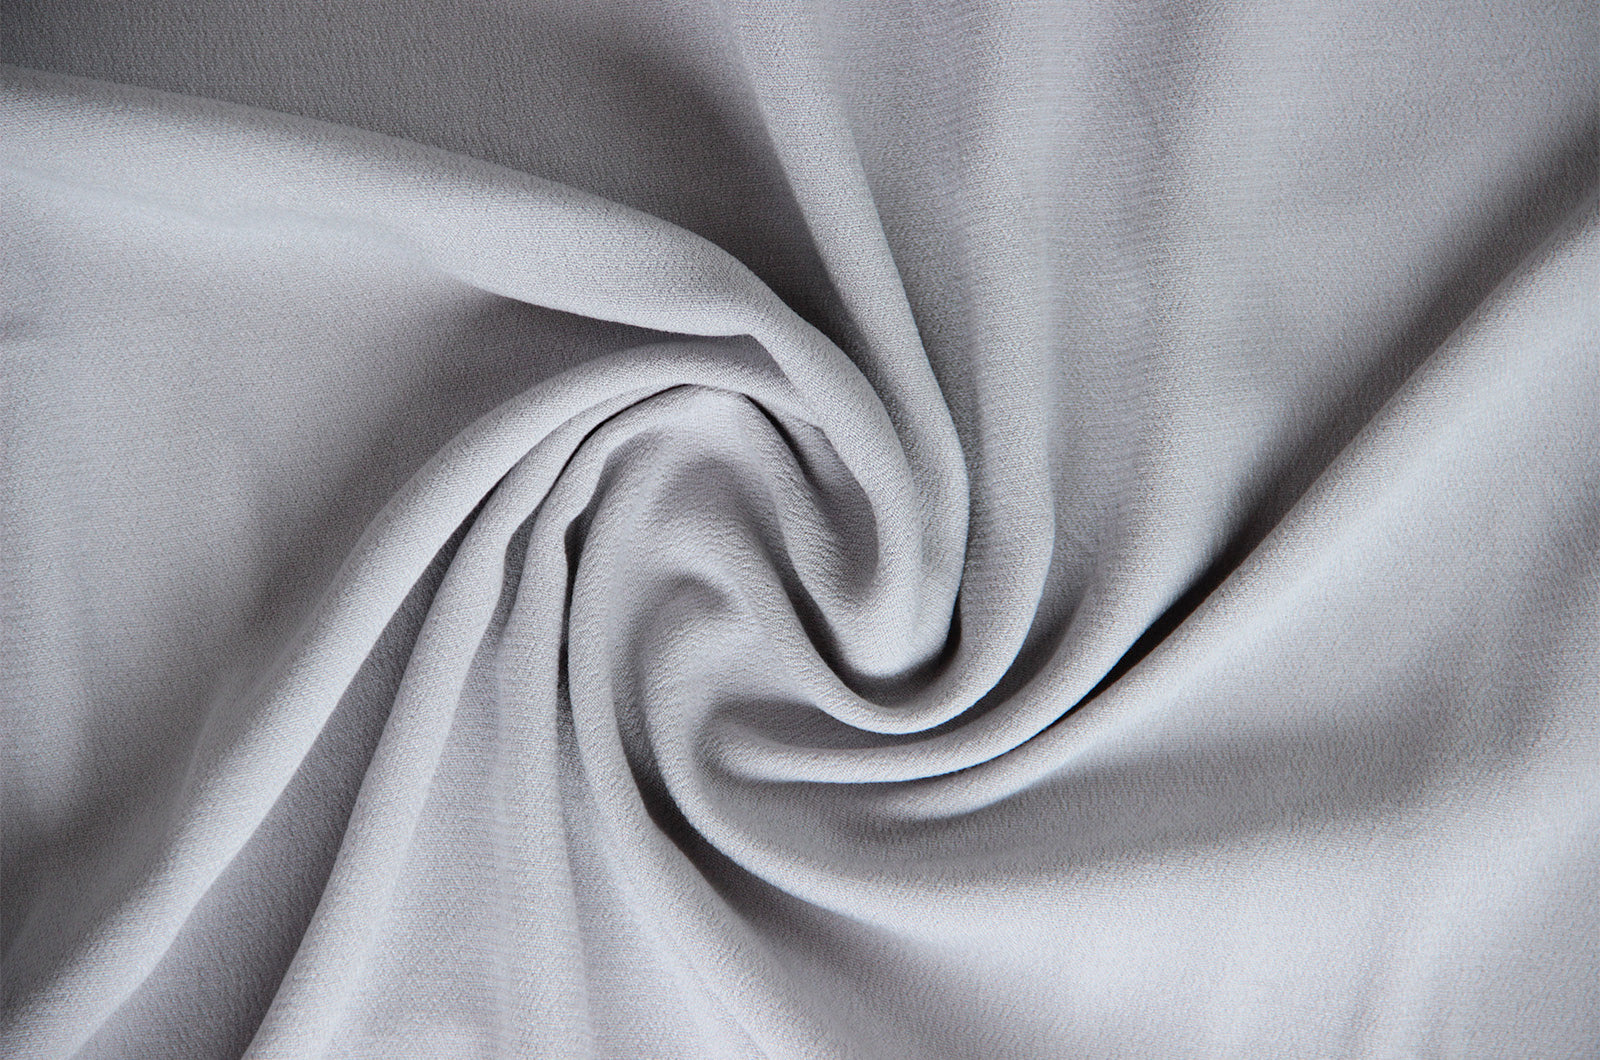 Viscose crepe * From 50 cm-22